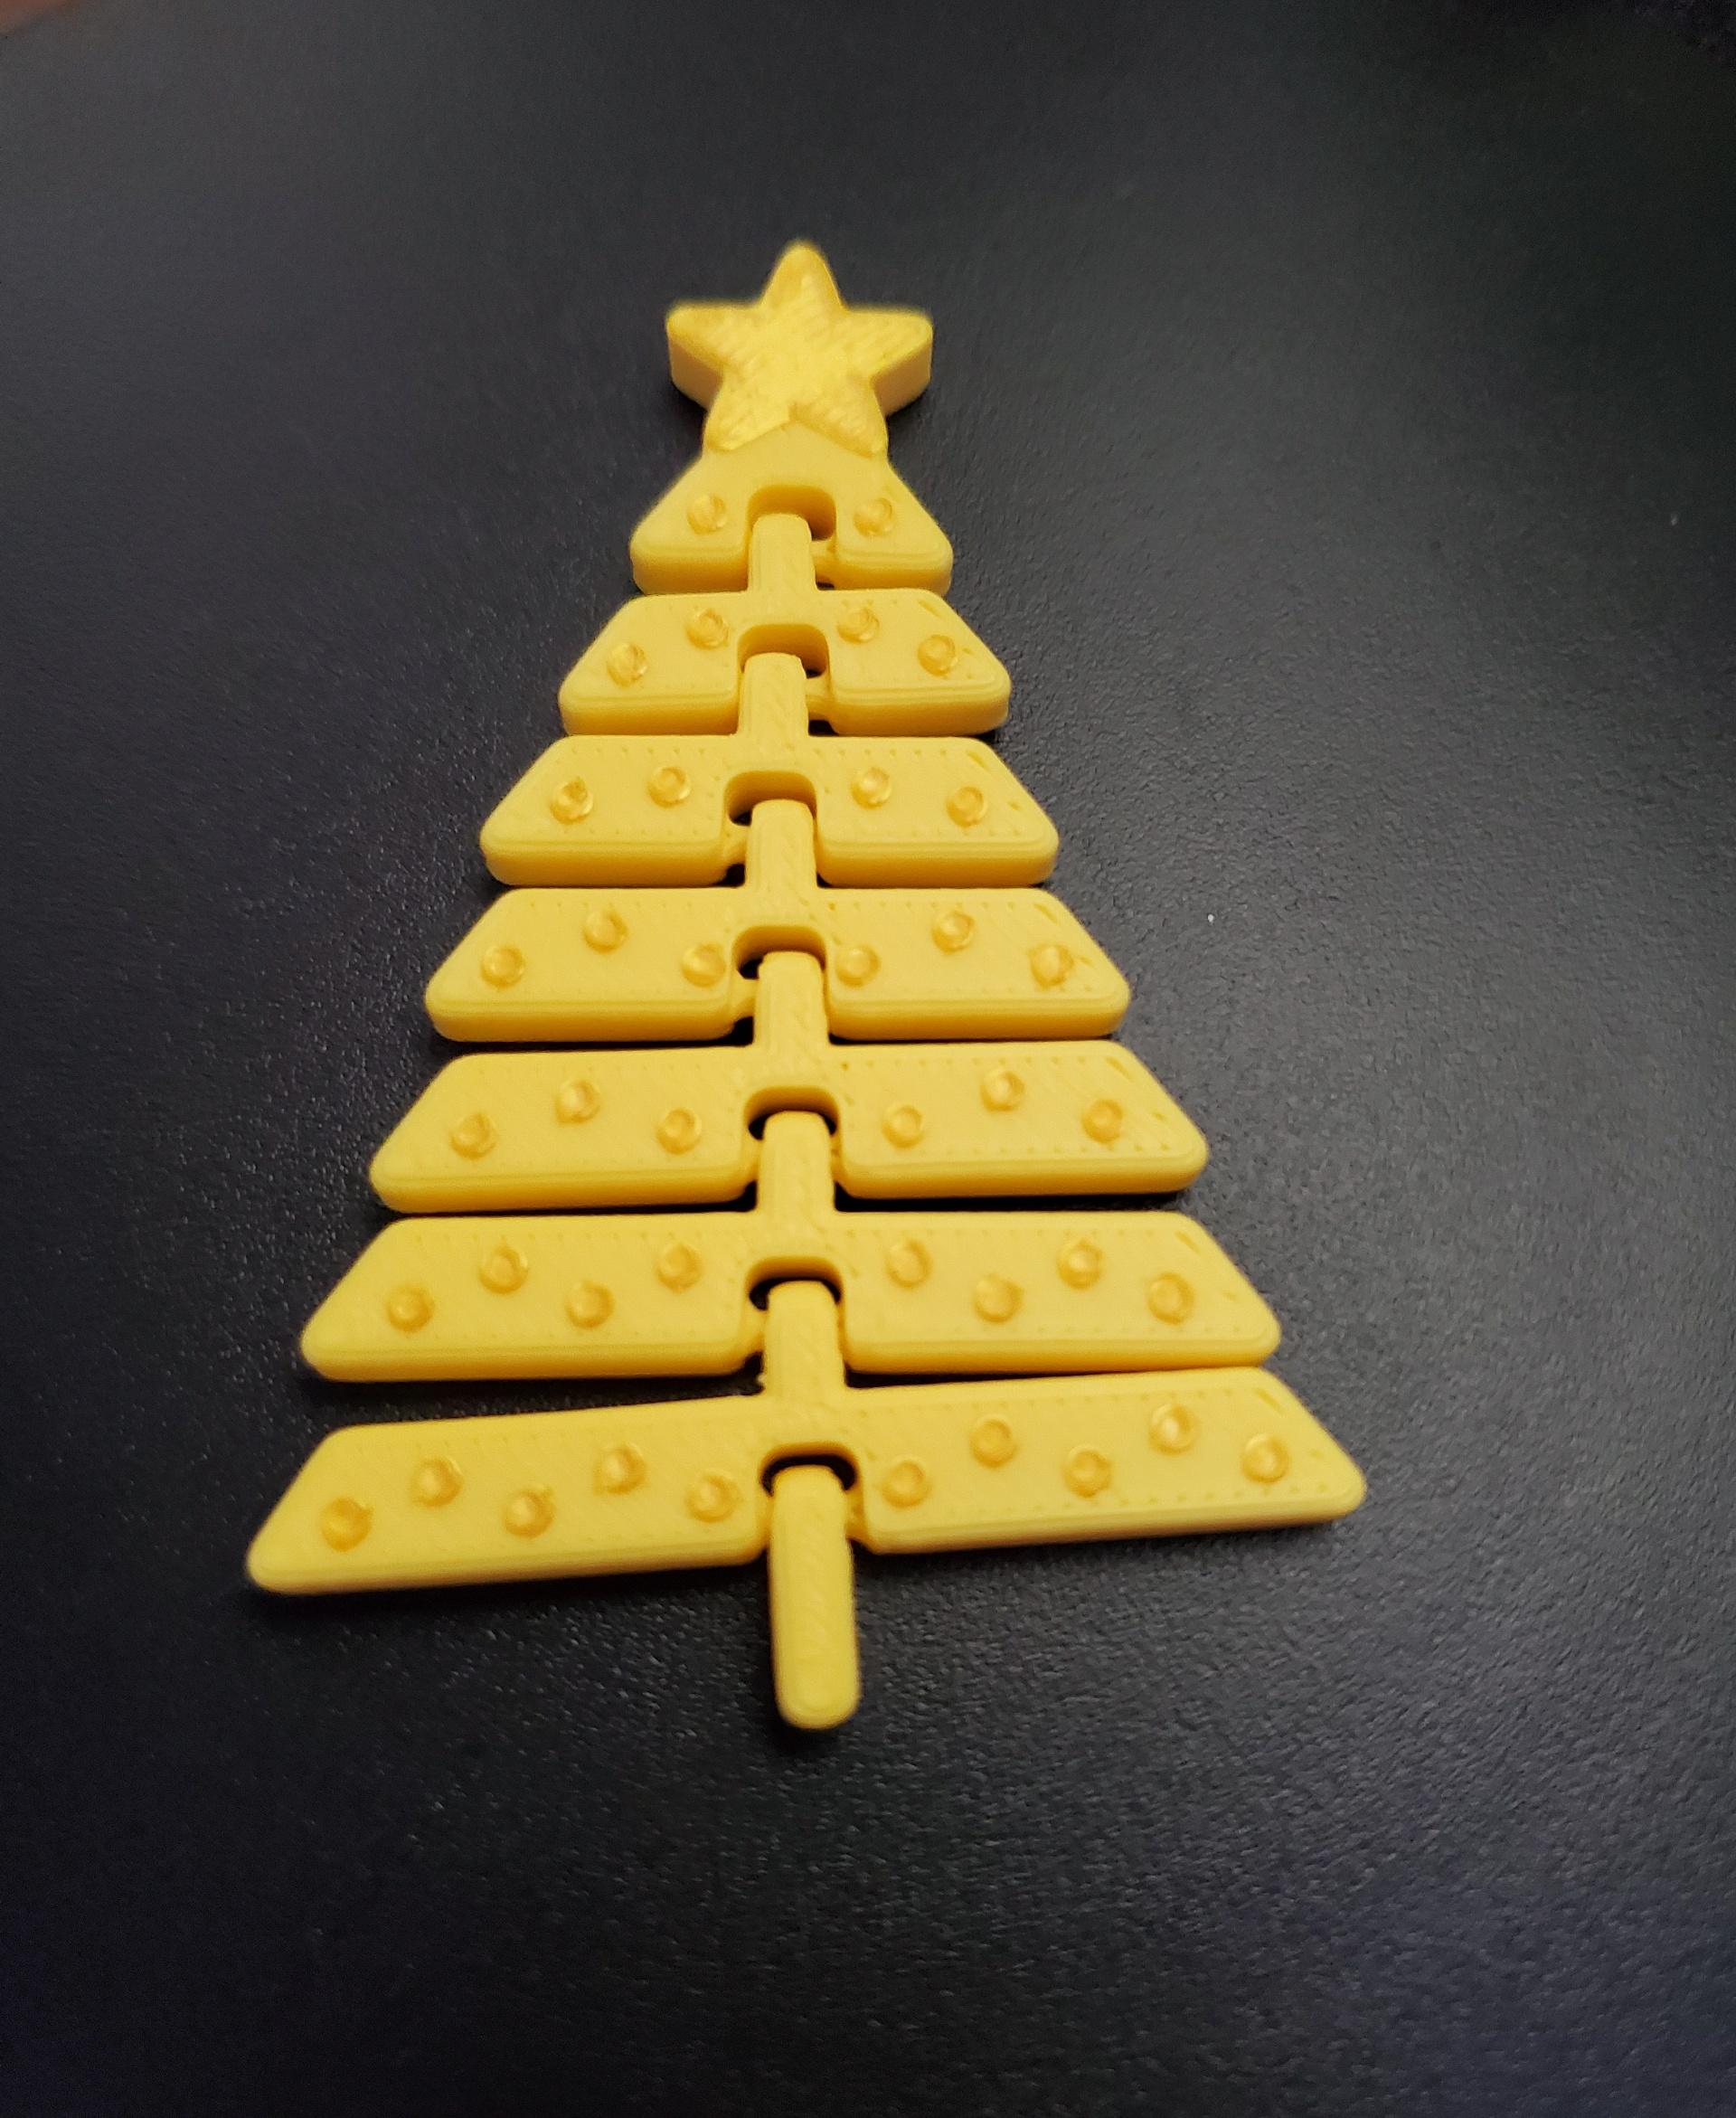 Articulated Christmas Tree with Star and Ornaments - Print in place fidget toys - 3mf - polyterra savannah yellow - 3d model